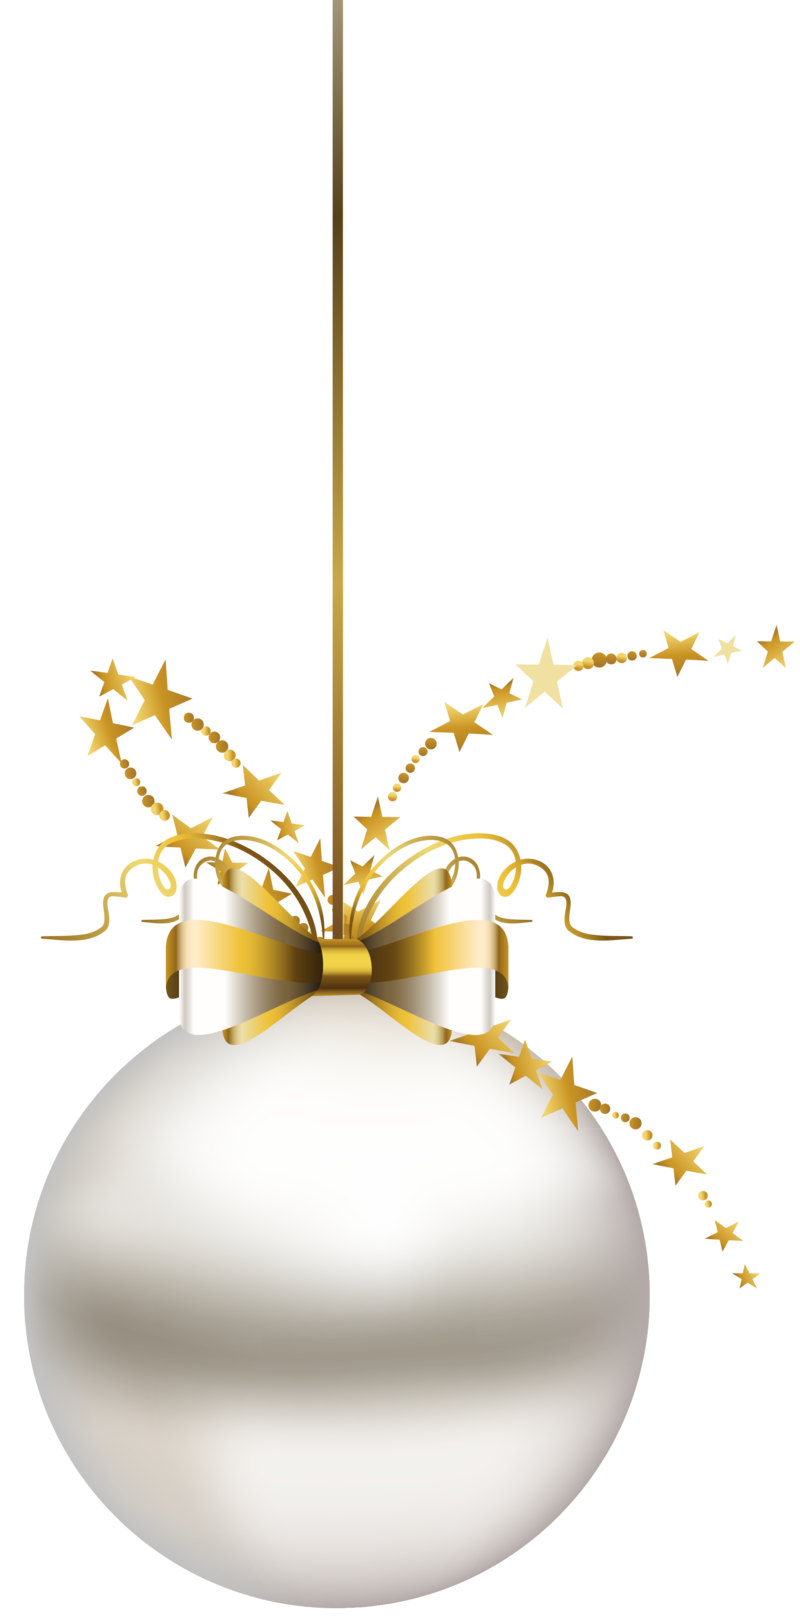 Transparent_PNG_Christmas_Ball_Clipart.png